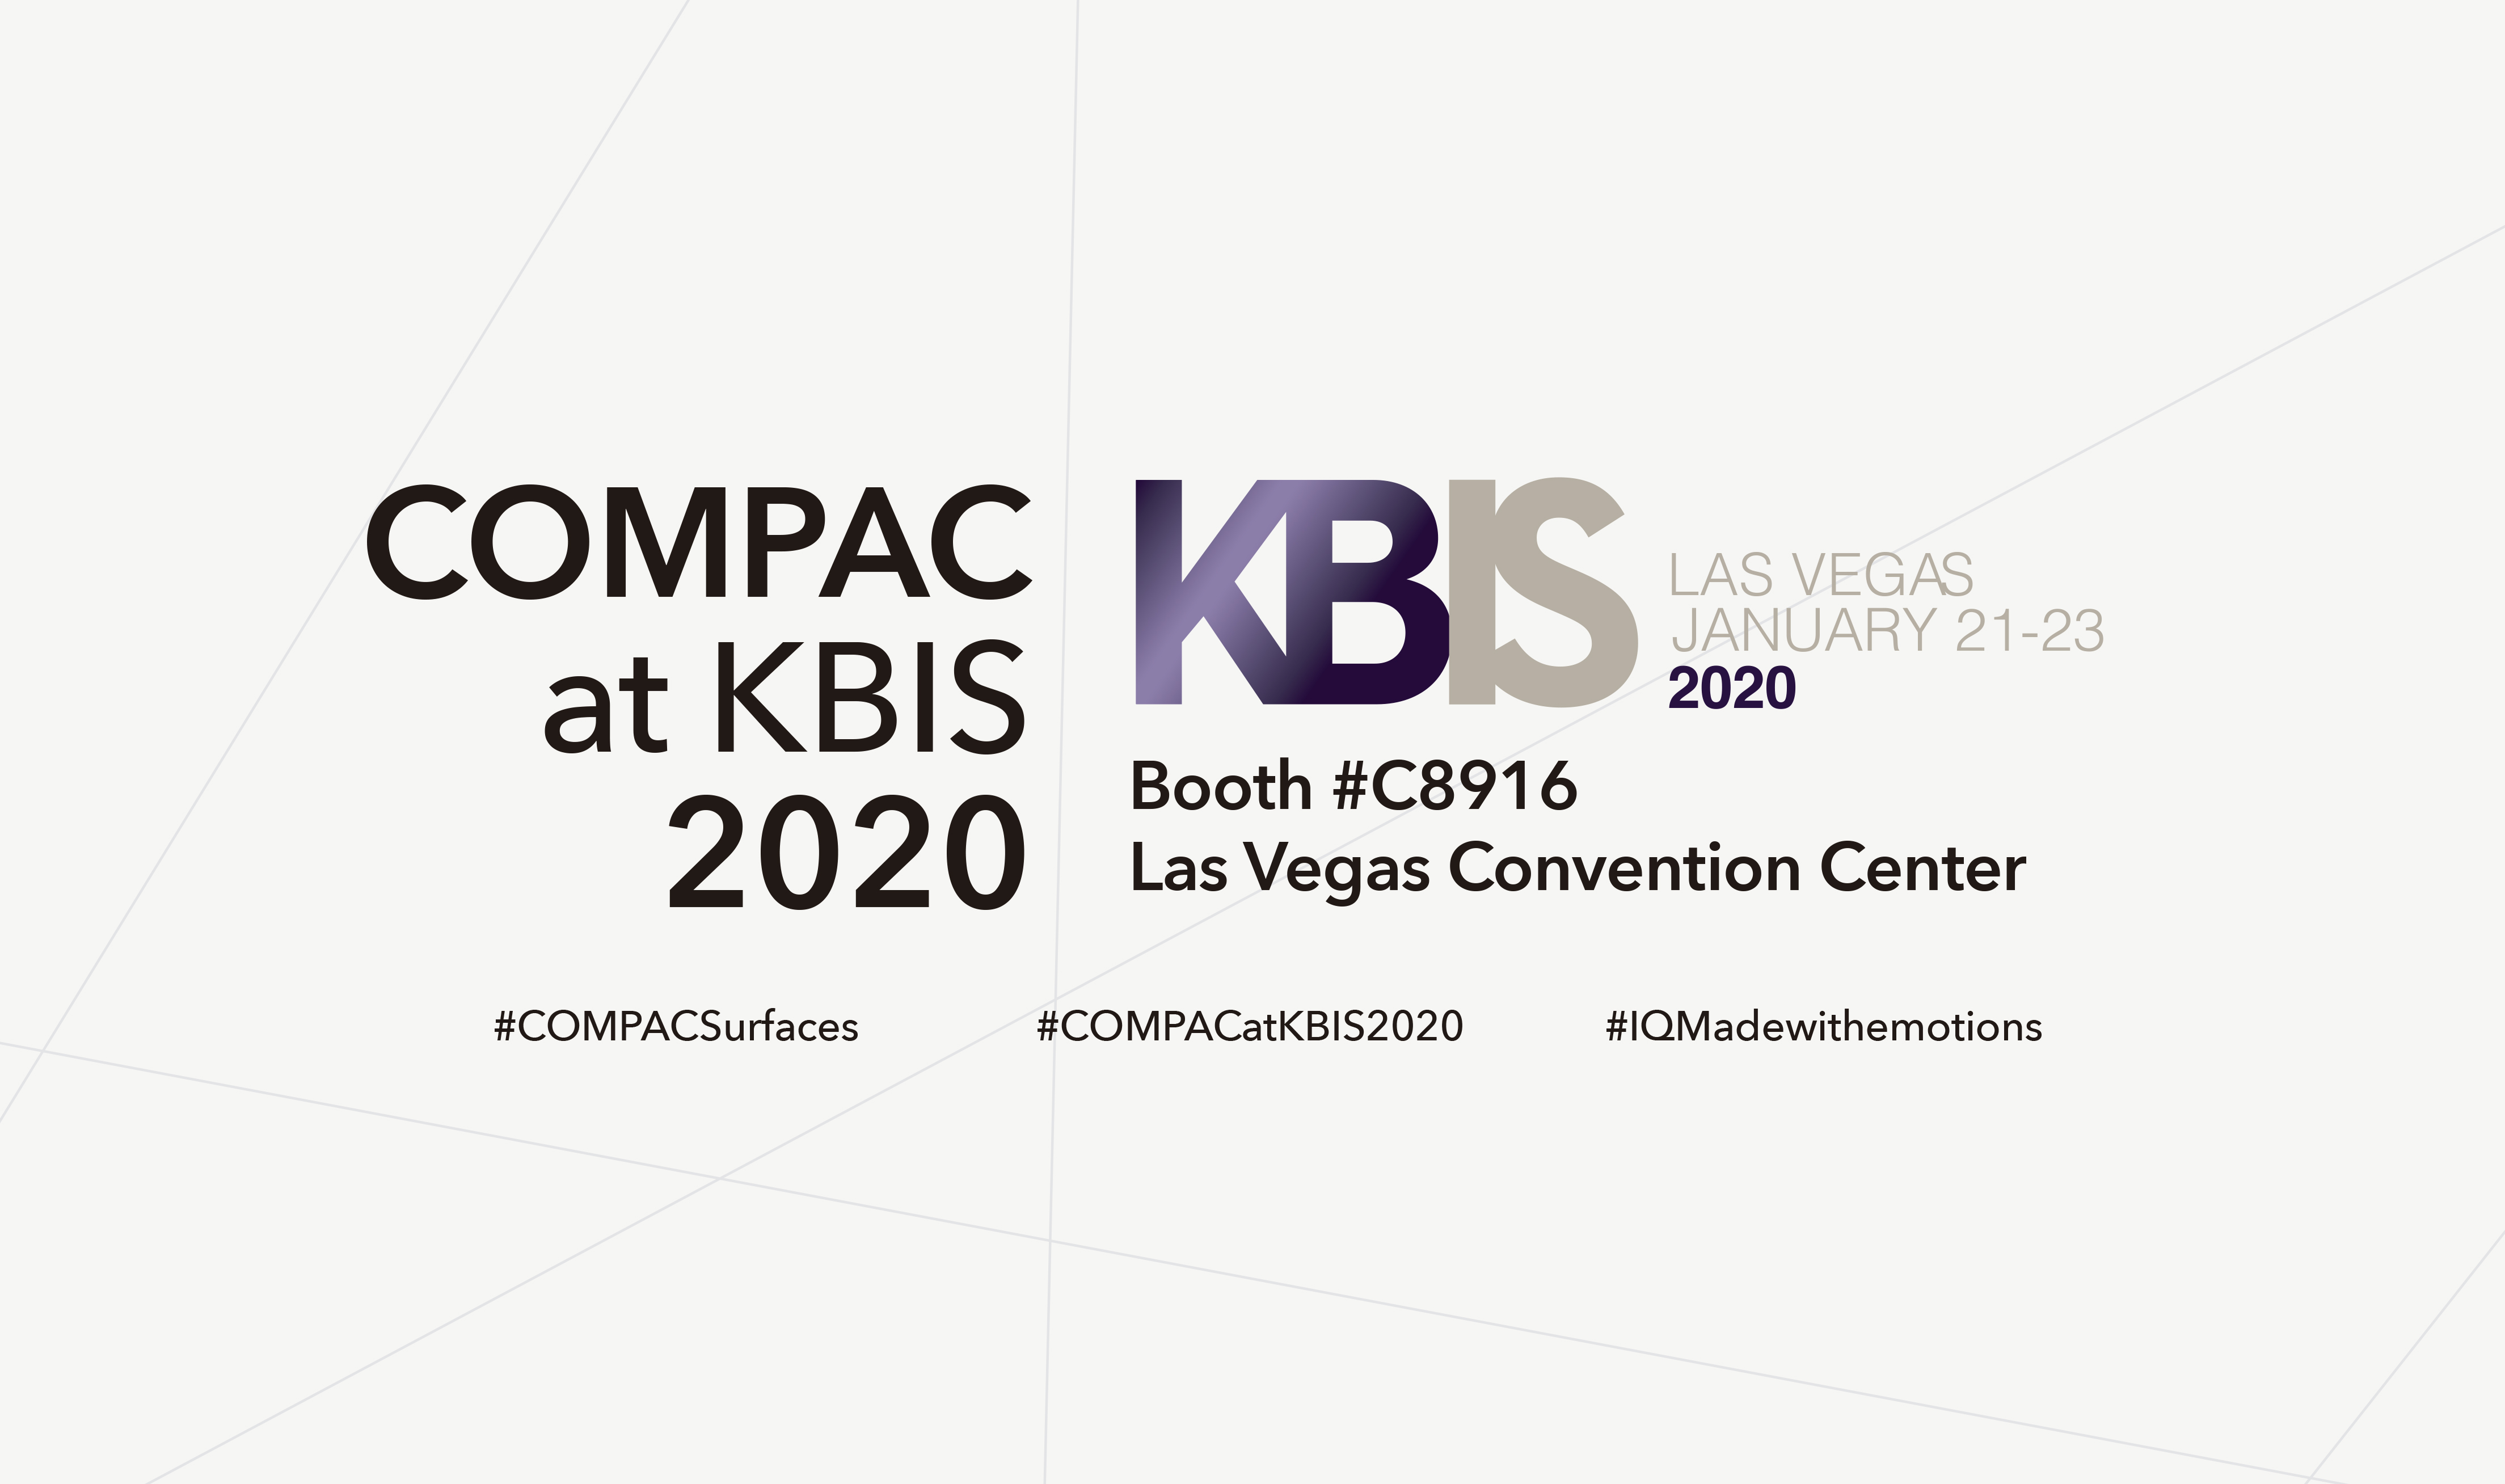 COMPAC explores the fusion of materiality and emotion at KBIS 2020